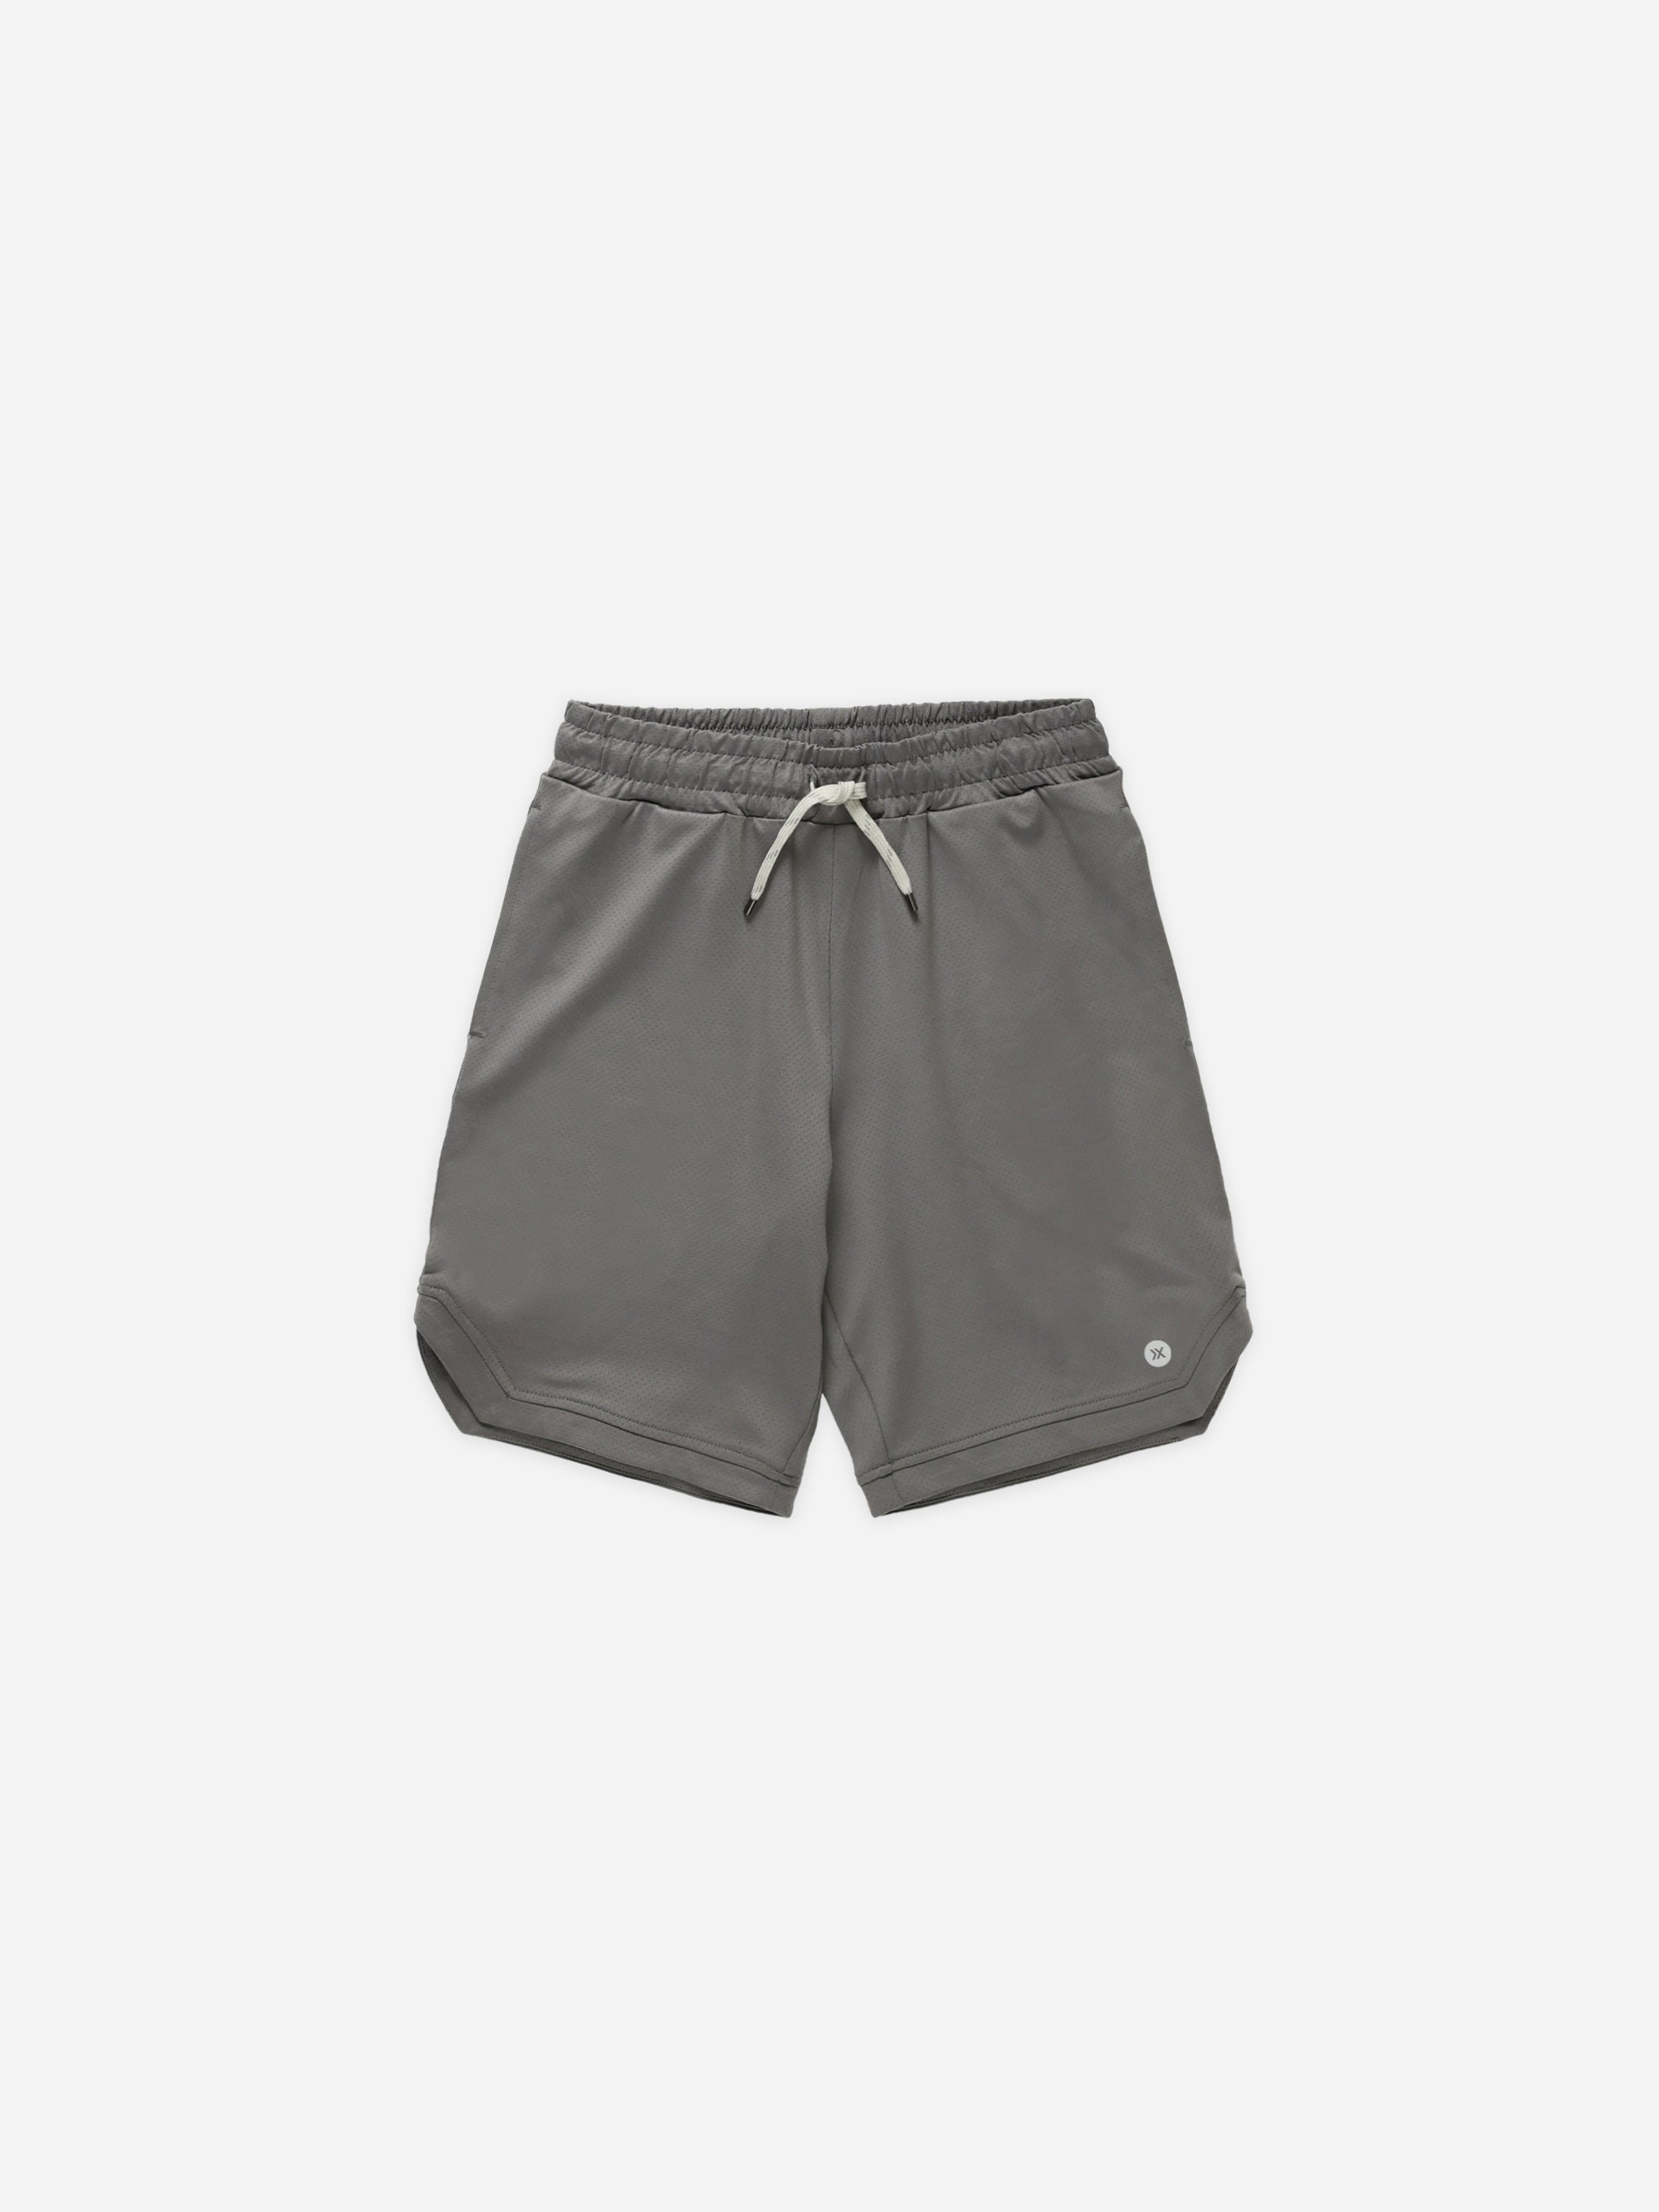 Basketball Short || Grey - Rylee + Cru | Kids Clothes | Trendy Baby Clothes | Modern Infant Outfits |